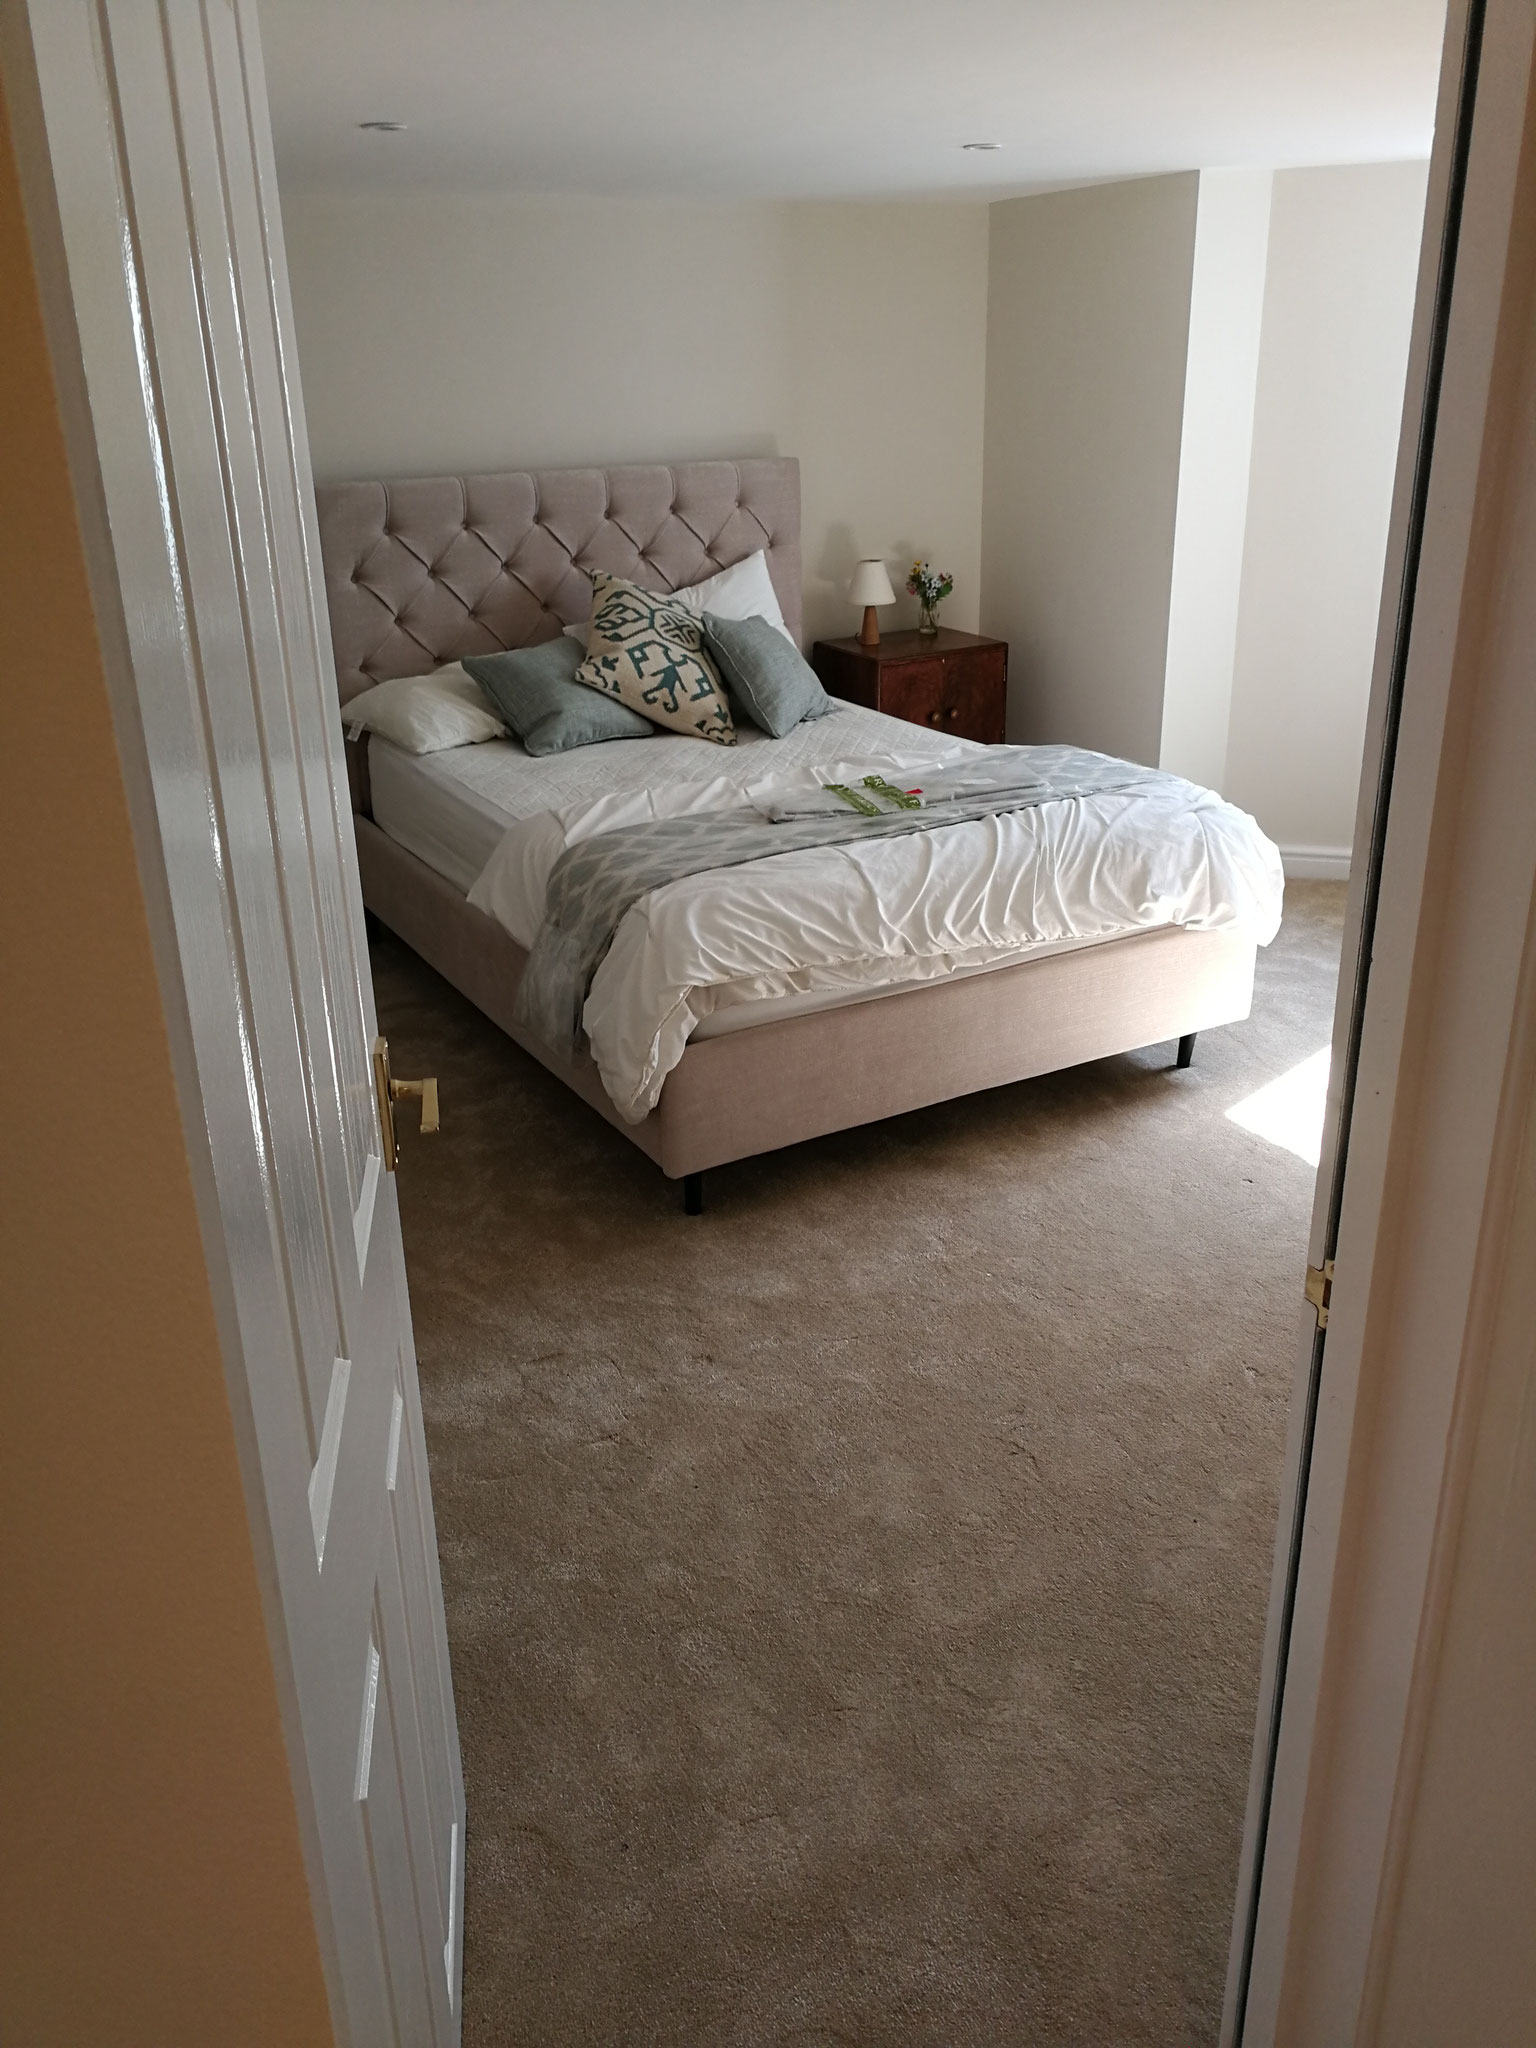 After - the bedroom